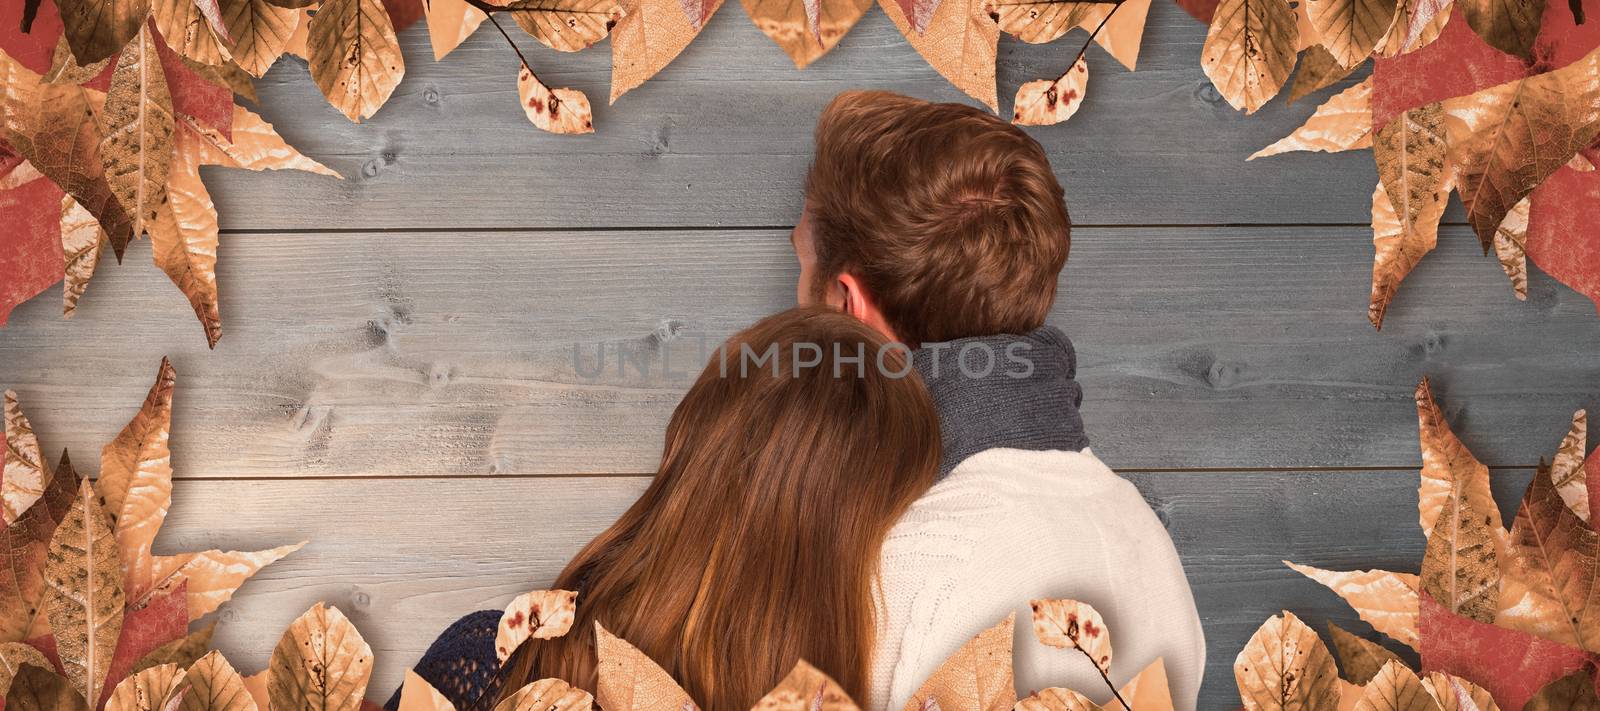 Composite image of close up rear view of romantic couple by Wavebreakmedia